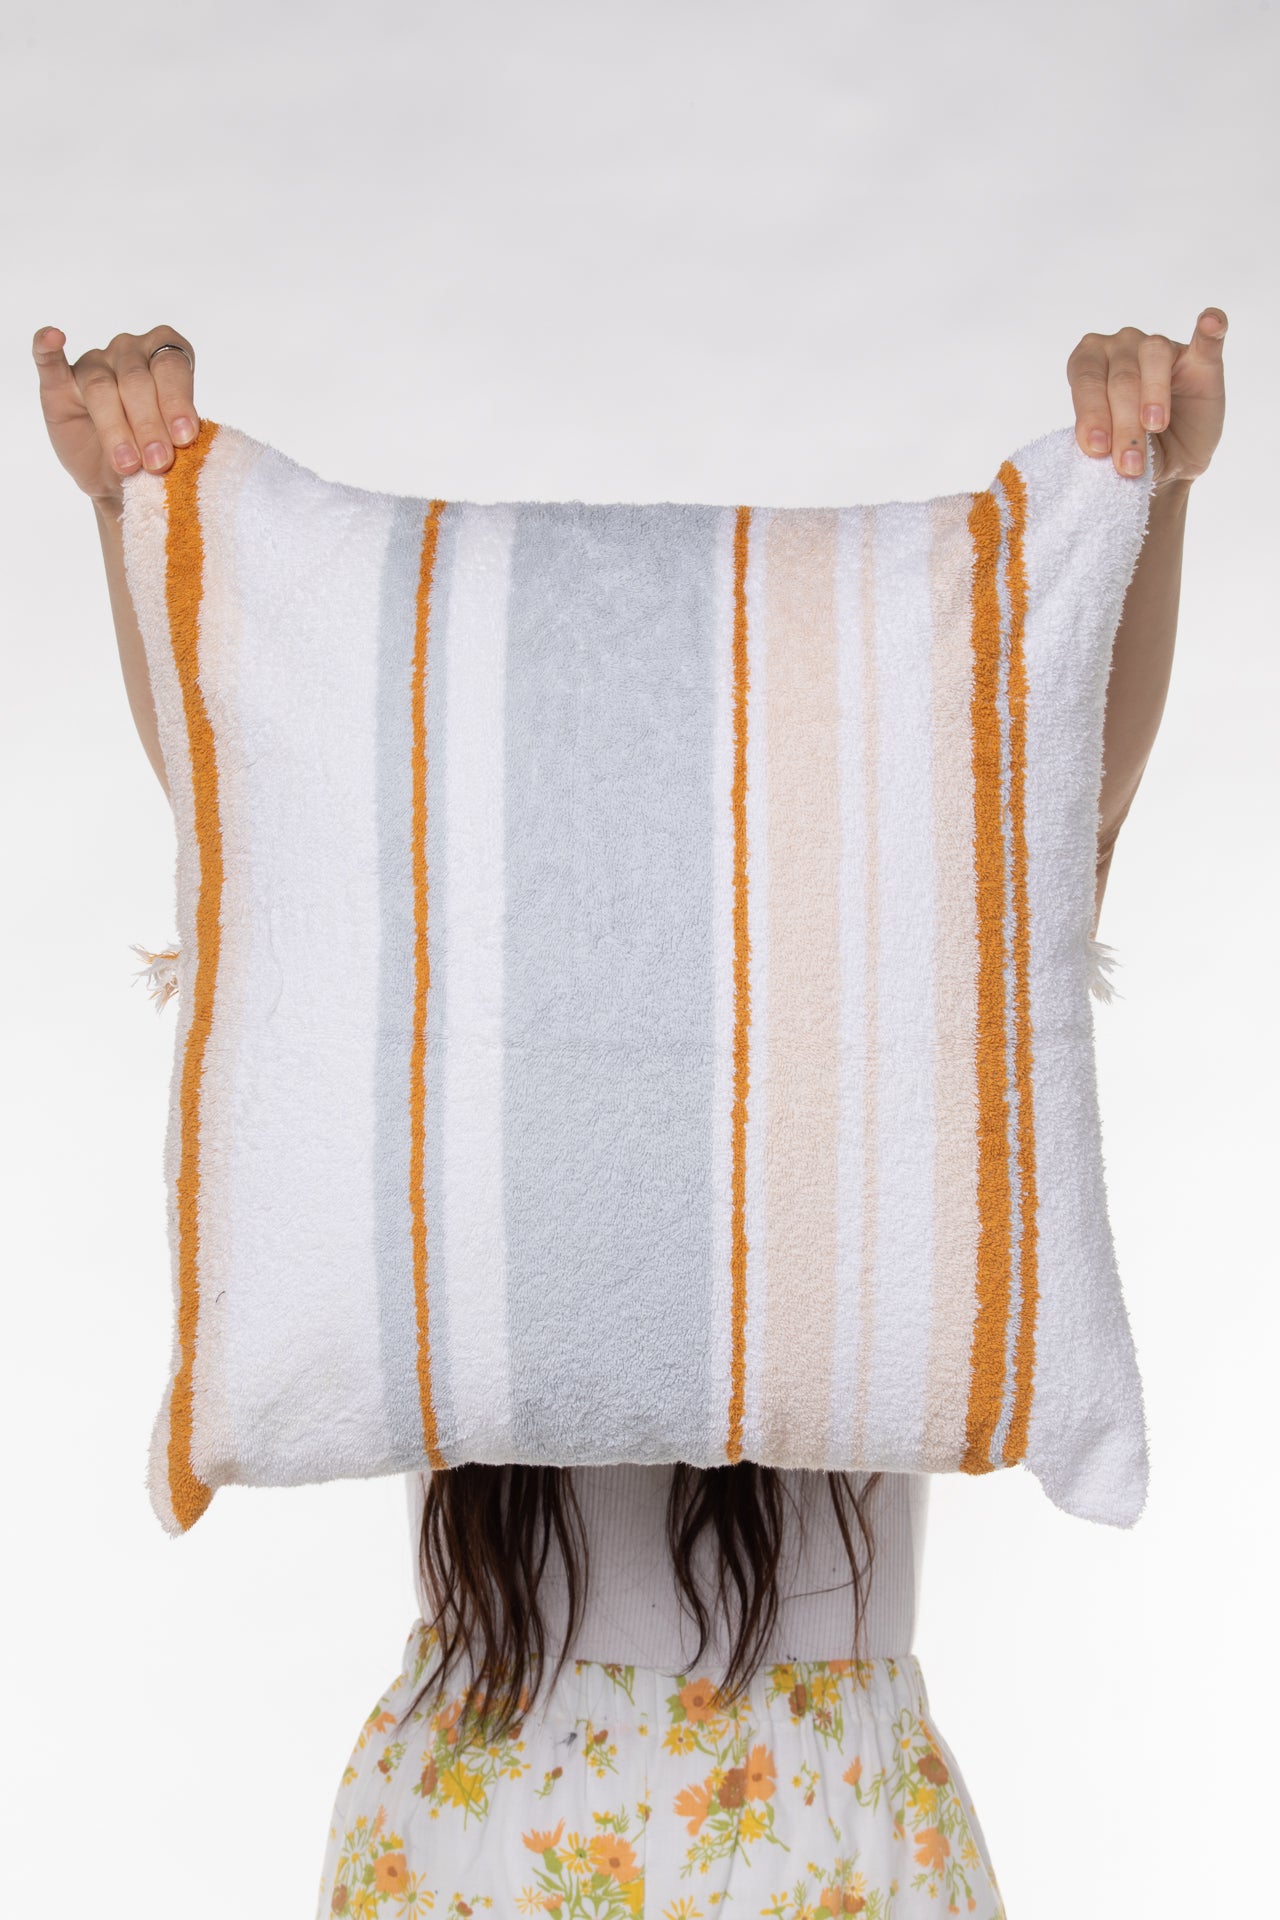 VINTAGE STRIPED POOLSIDE PILLOW COVER